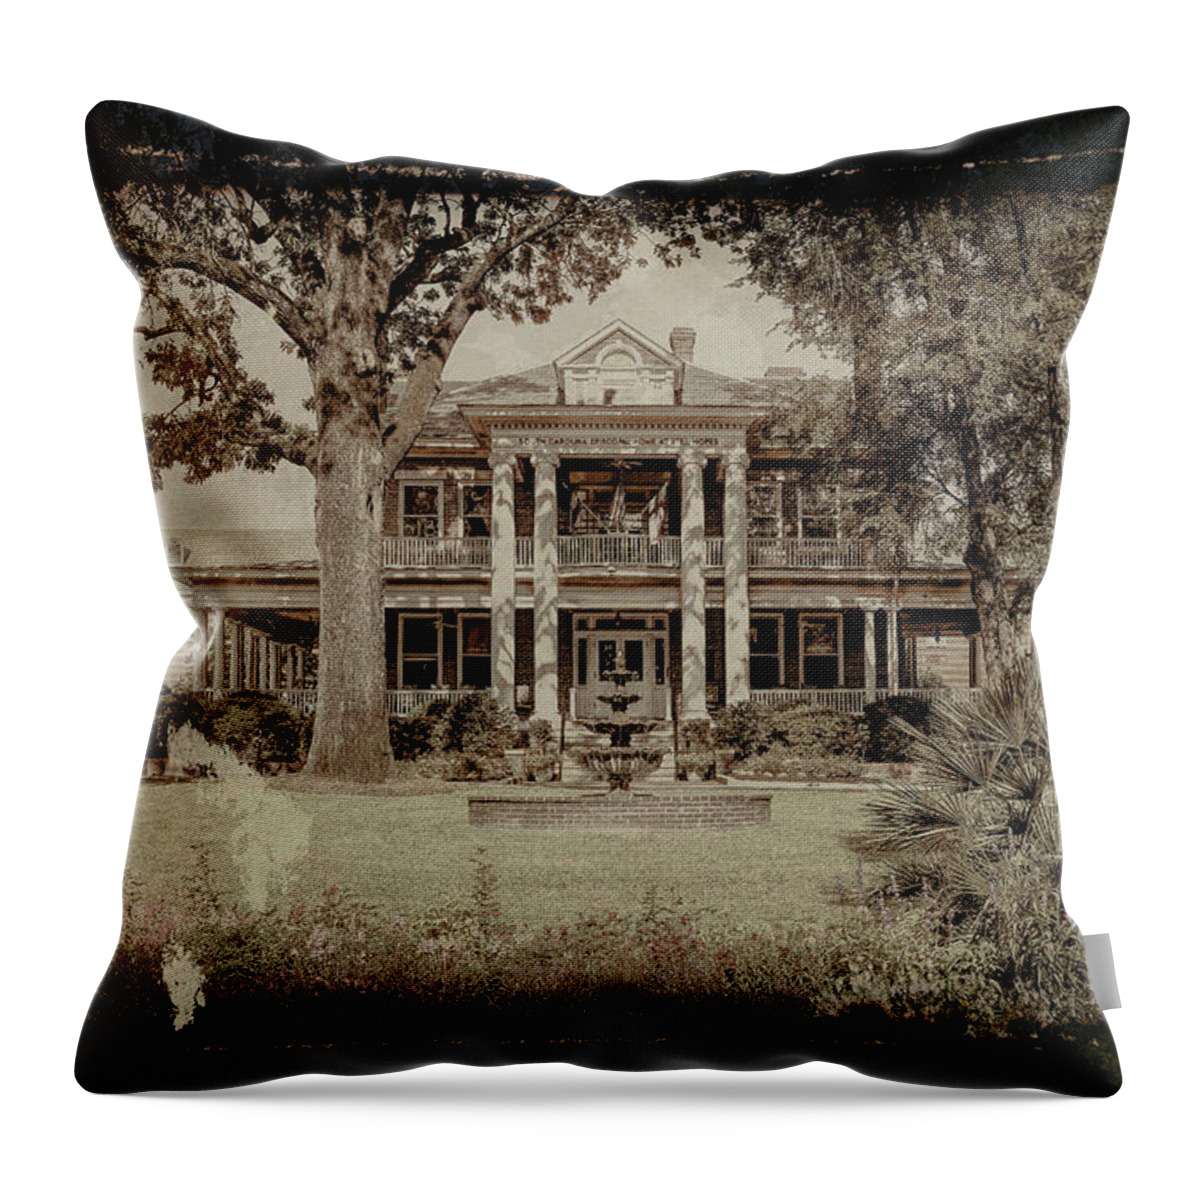 2016 Throw Pillow featuring the photograph Brickworks 47 by Charles Hite